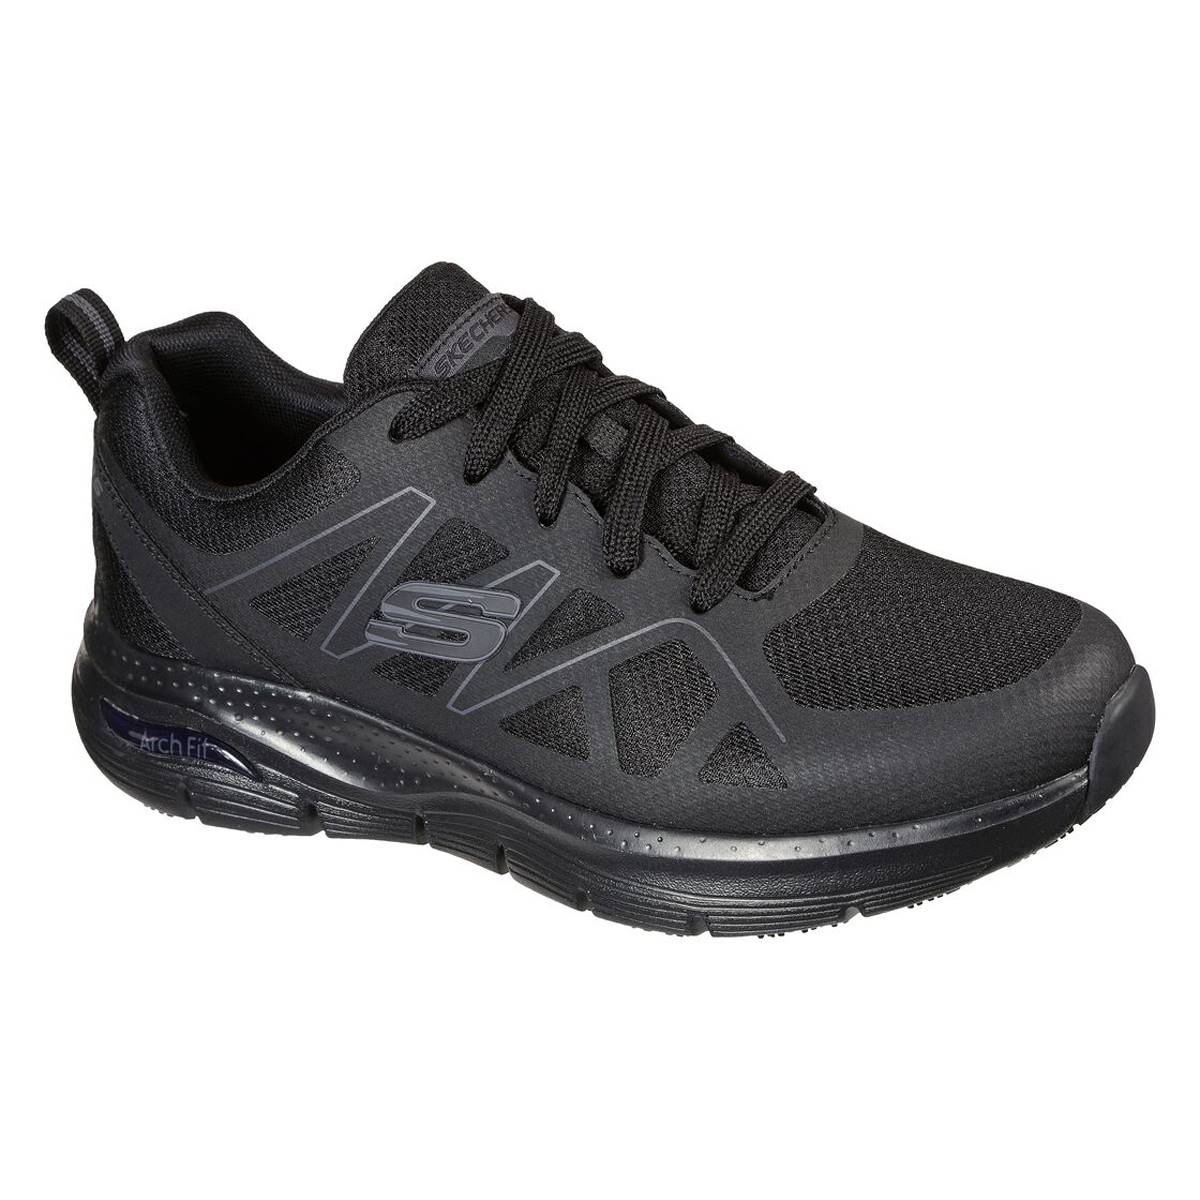 Mens Skechers Arch Fit Sr-Axtell Athletic Work Sneakers